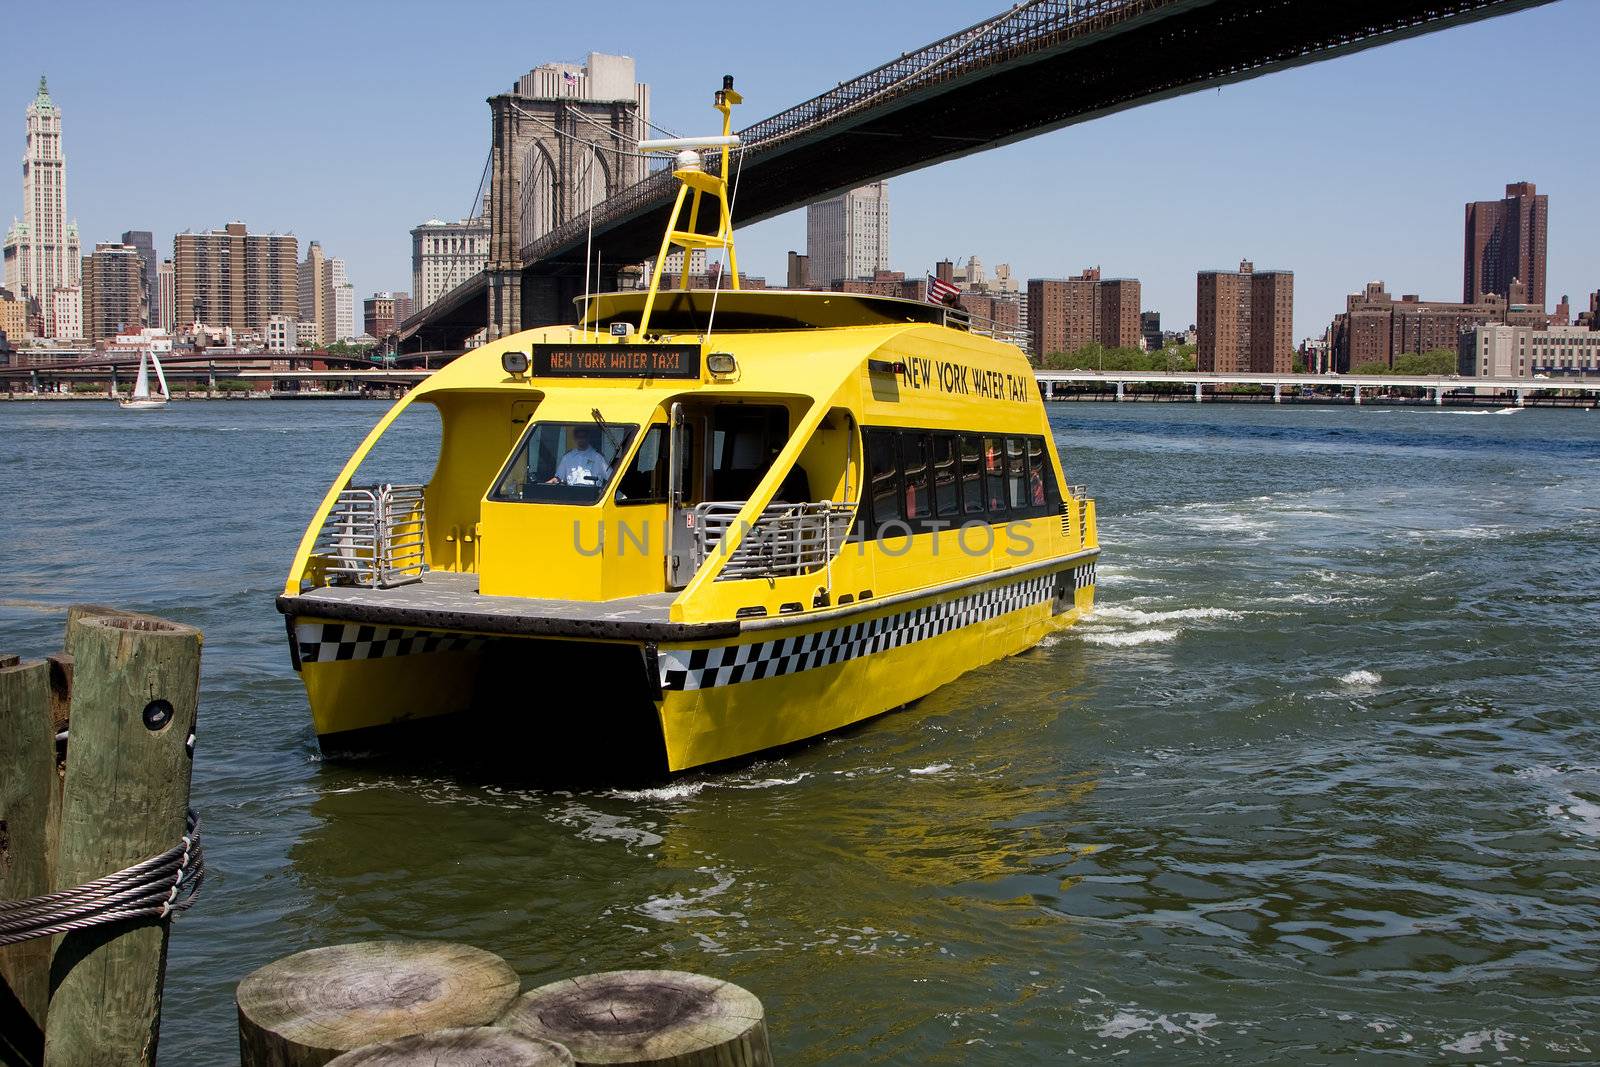 NYC Water Taxi by phakimata